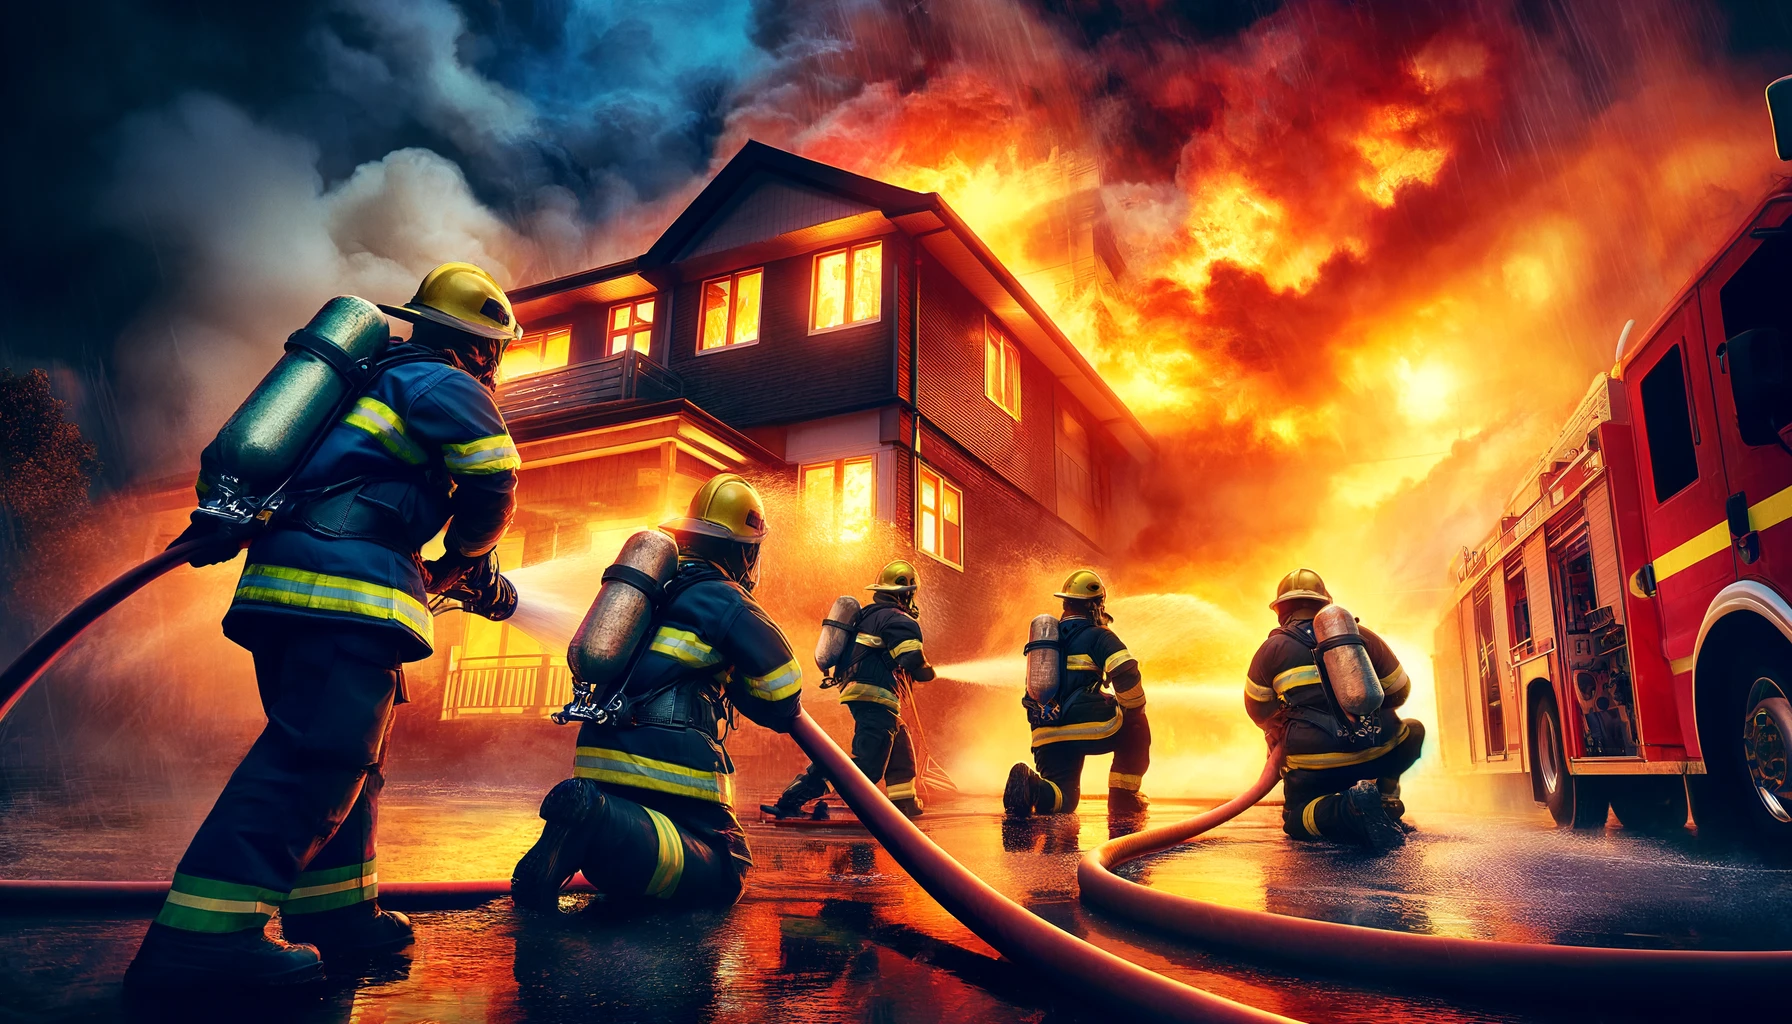 A dramatic and vibrant scene of firefighters in action, tackling a large blaze at a residential building. The image should capture the intensity and b